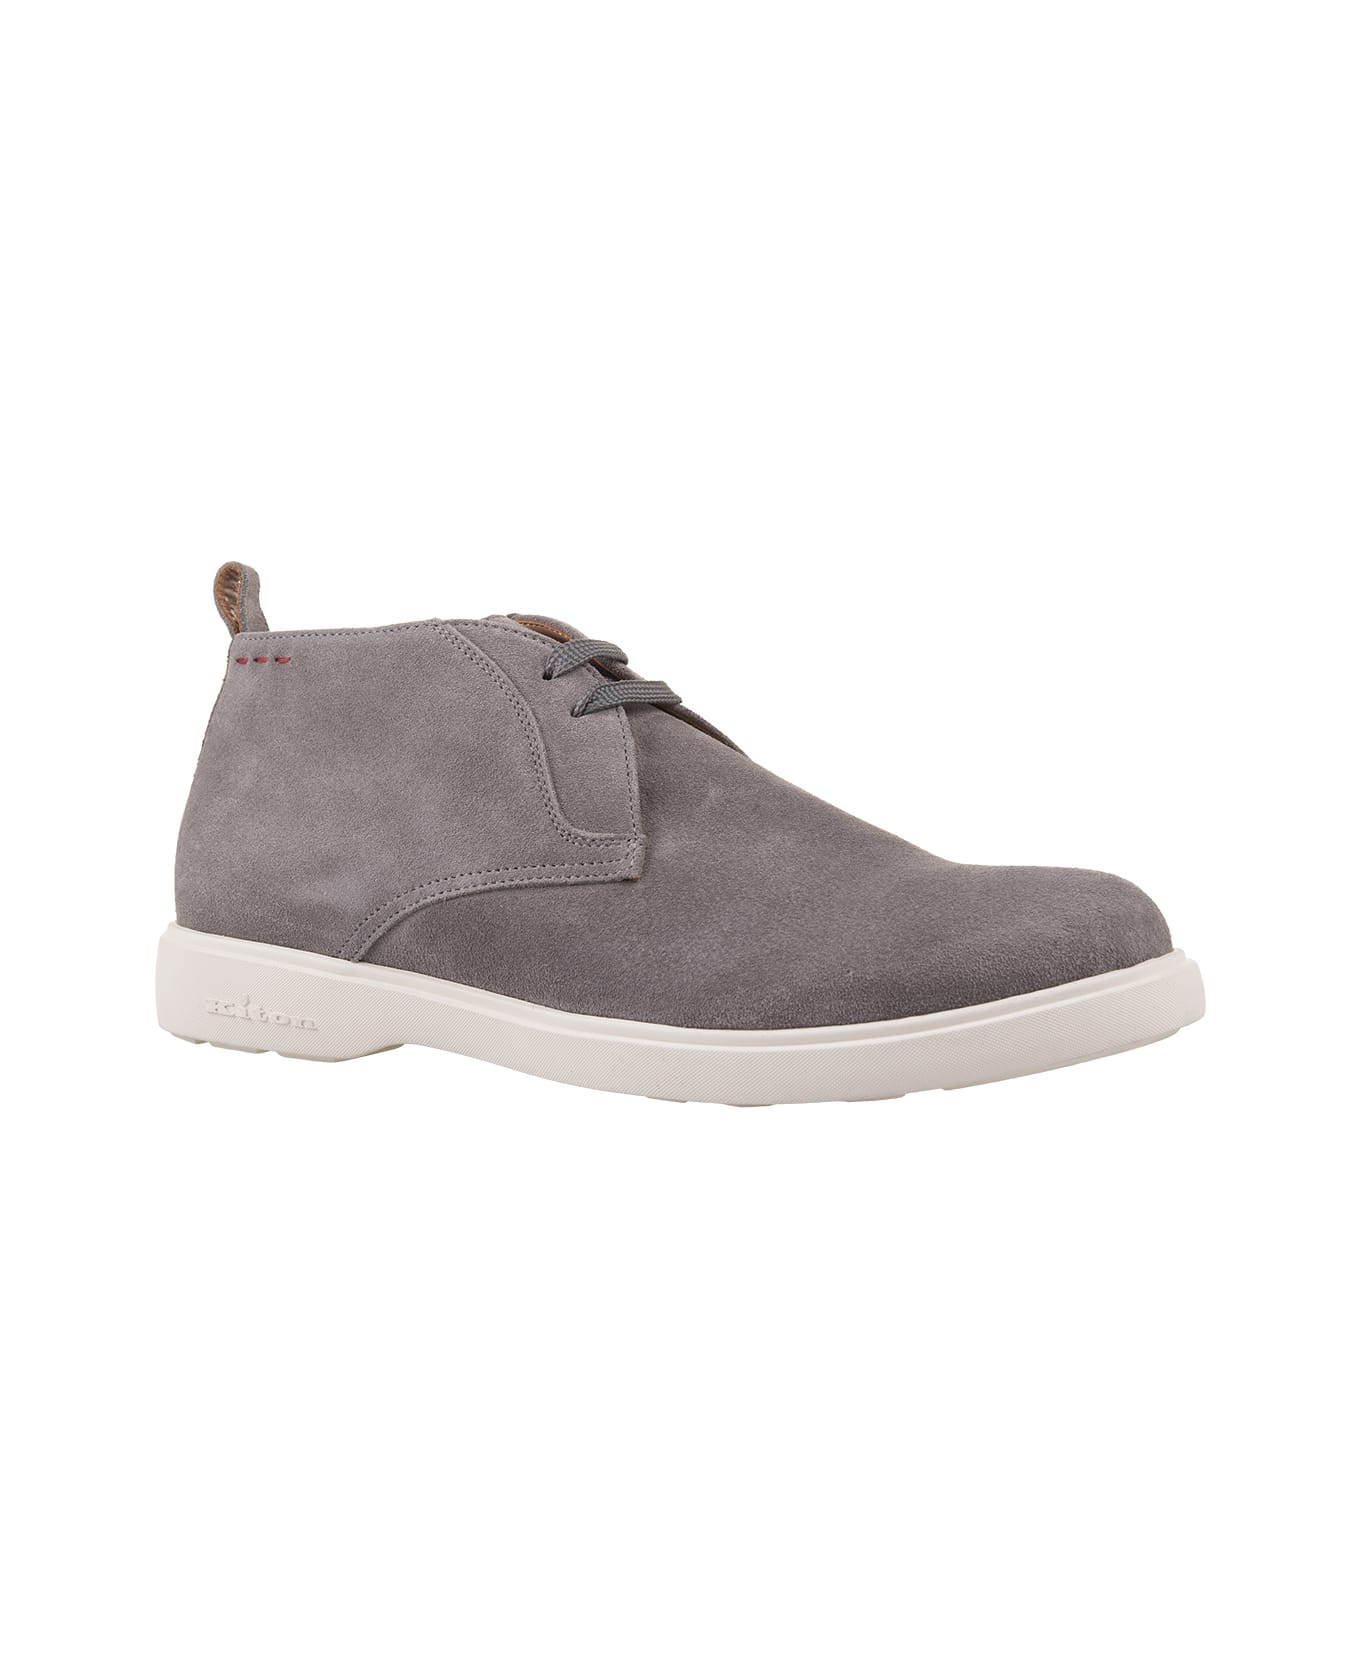 Kiton Grey Suede Laced Leather Ankle Boots - Grey ローファー＆デッキシューズ